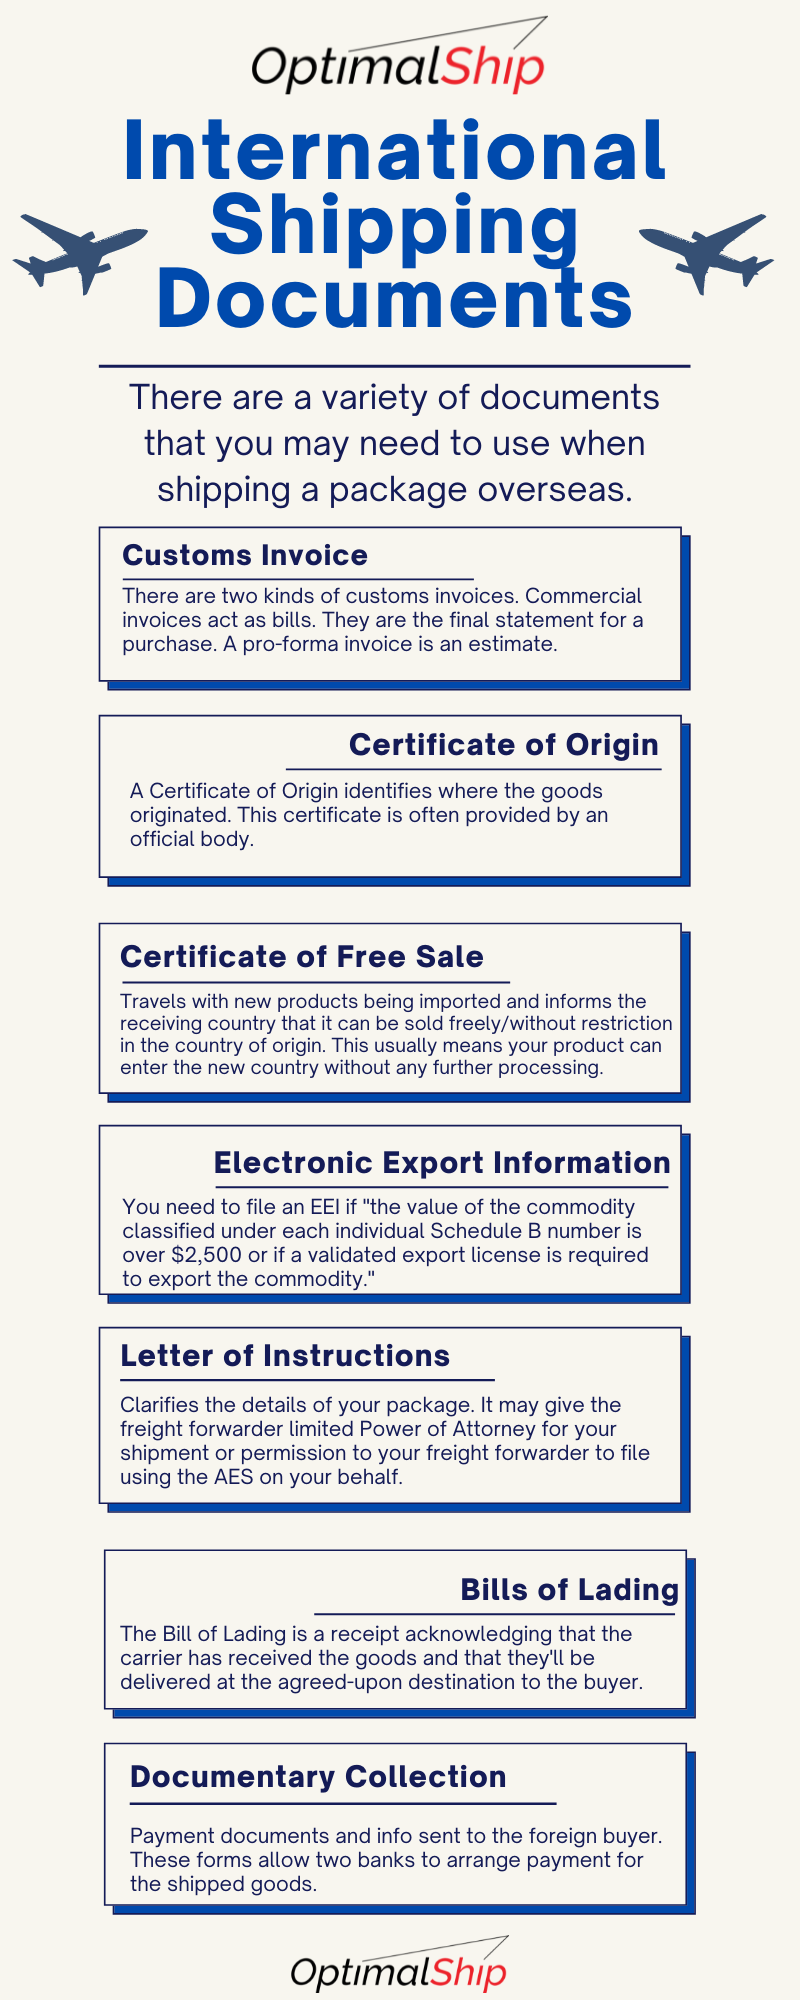 Shipping Documents: 10 Most Important Documents You Must Know